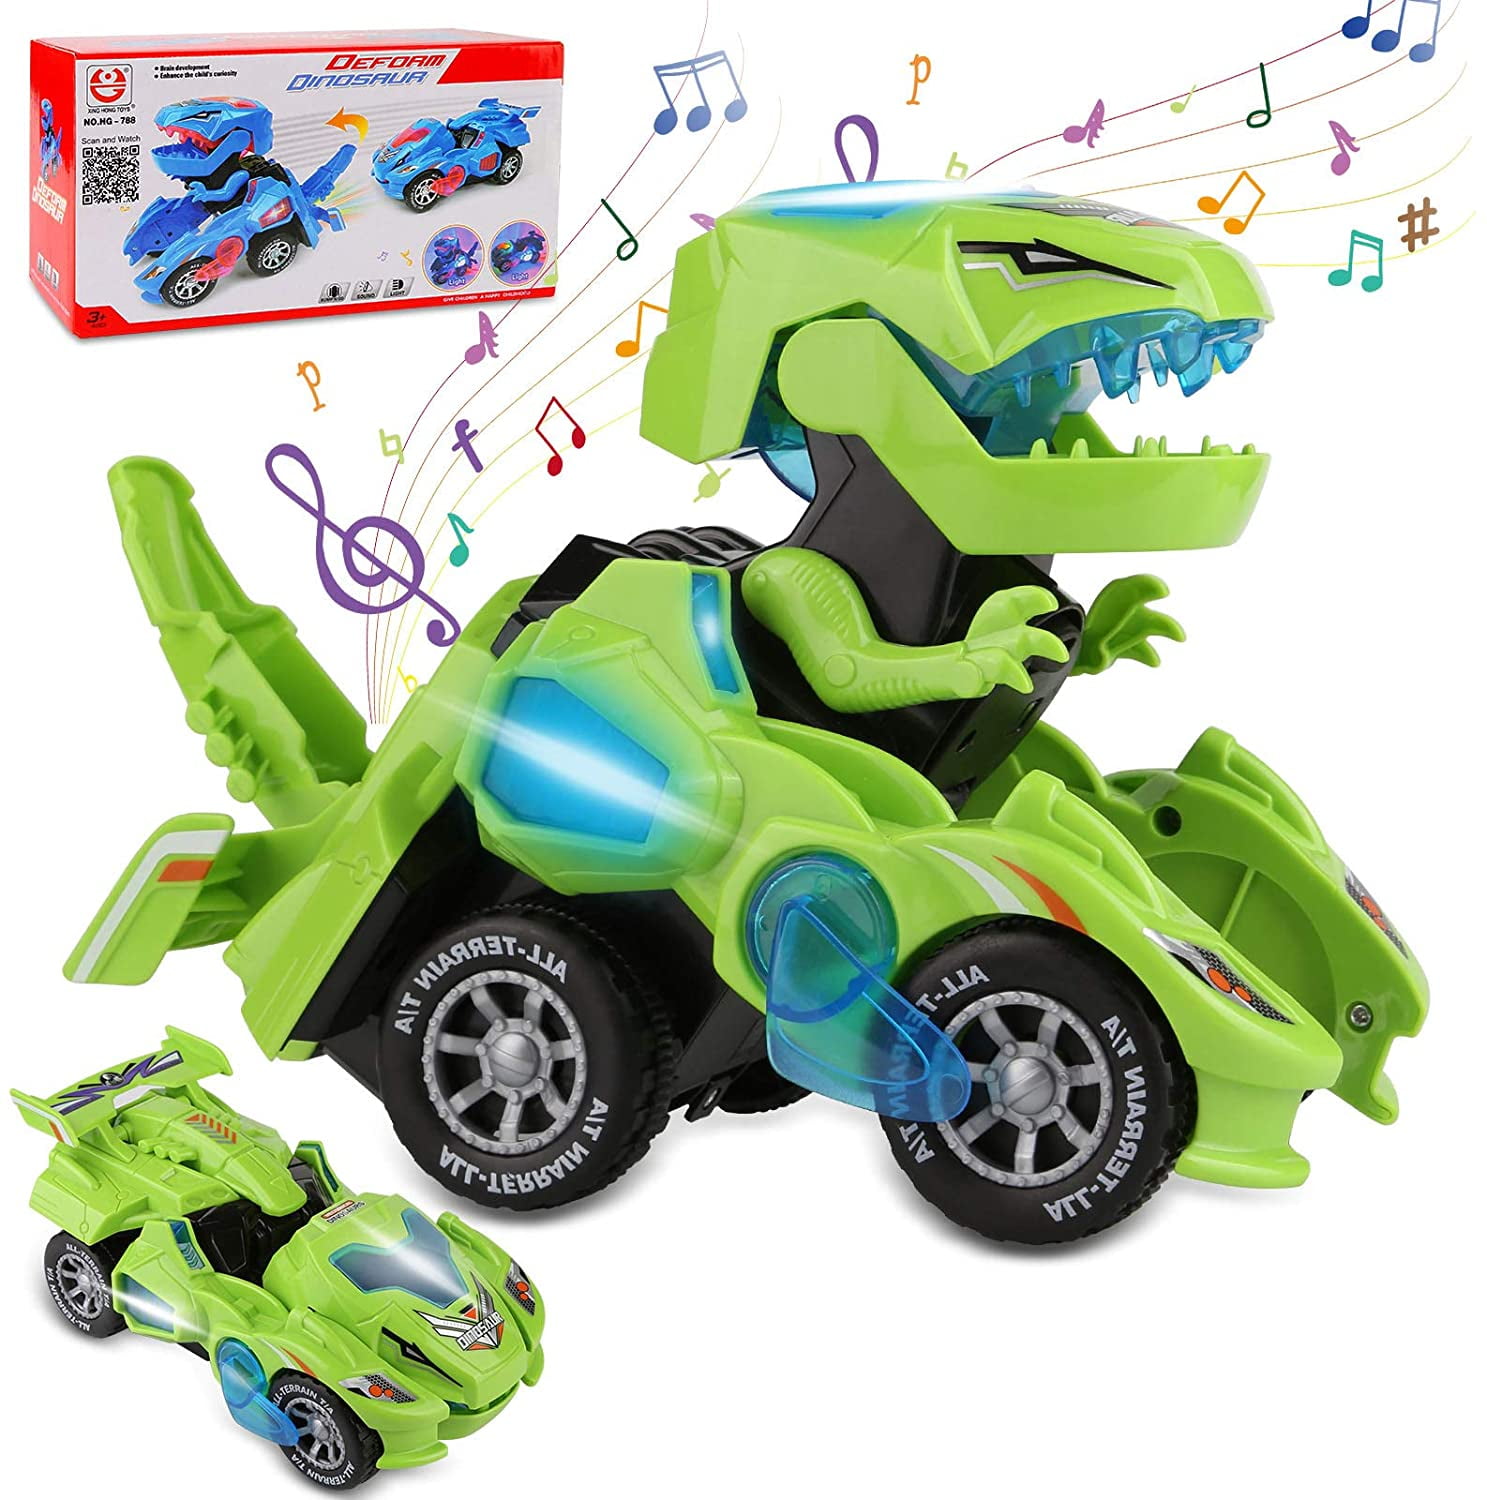 Dino Cars Vehicles Playset Toddler Infant Early Education for Boys and Girls Cool Mist Spray Fun Kids Dinosaur Toy with Light & Sound Dinosaur Car Toys 